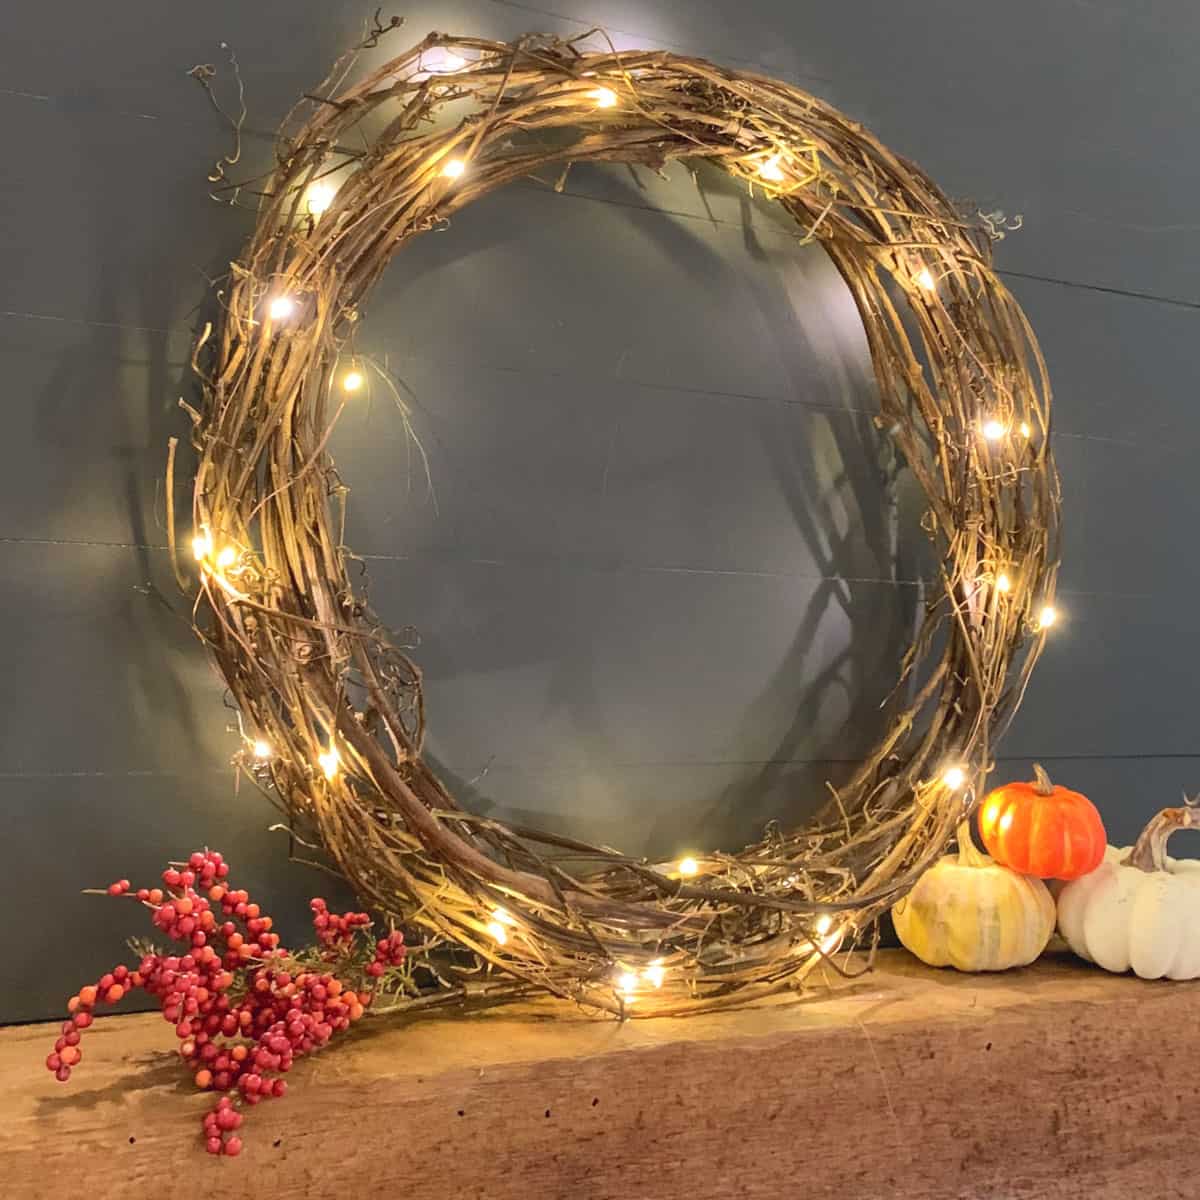 DIY Grapevine Wreath With Lights